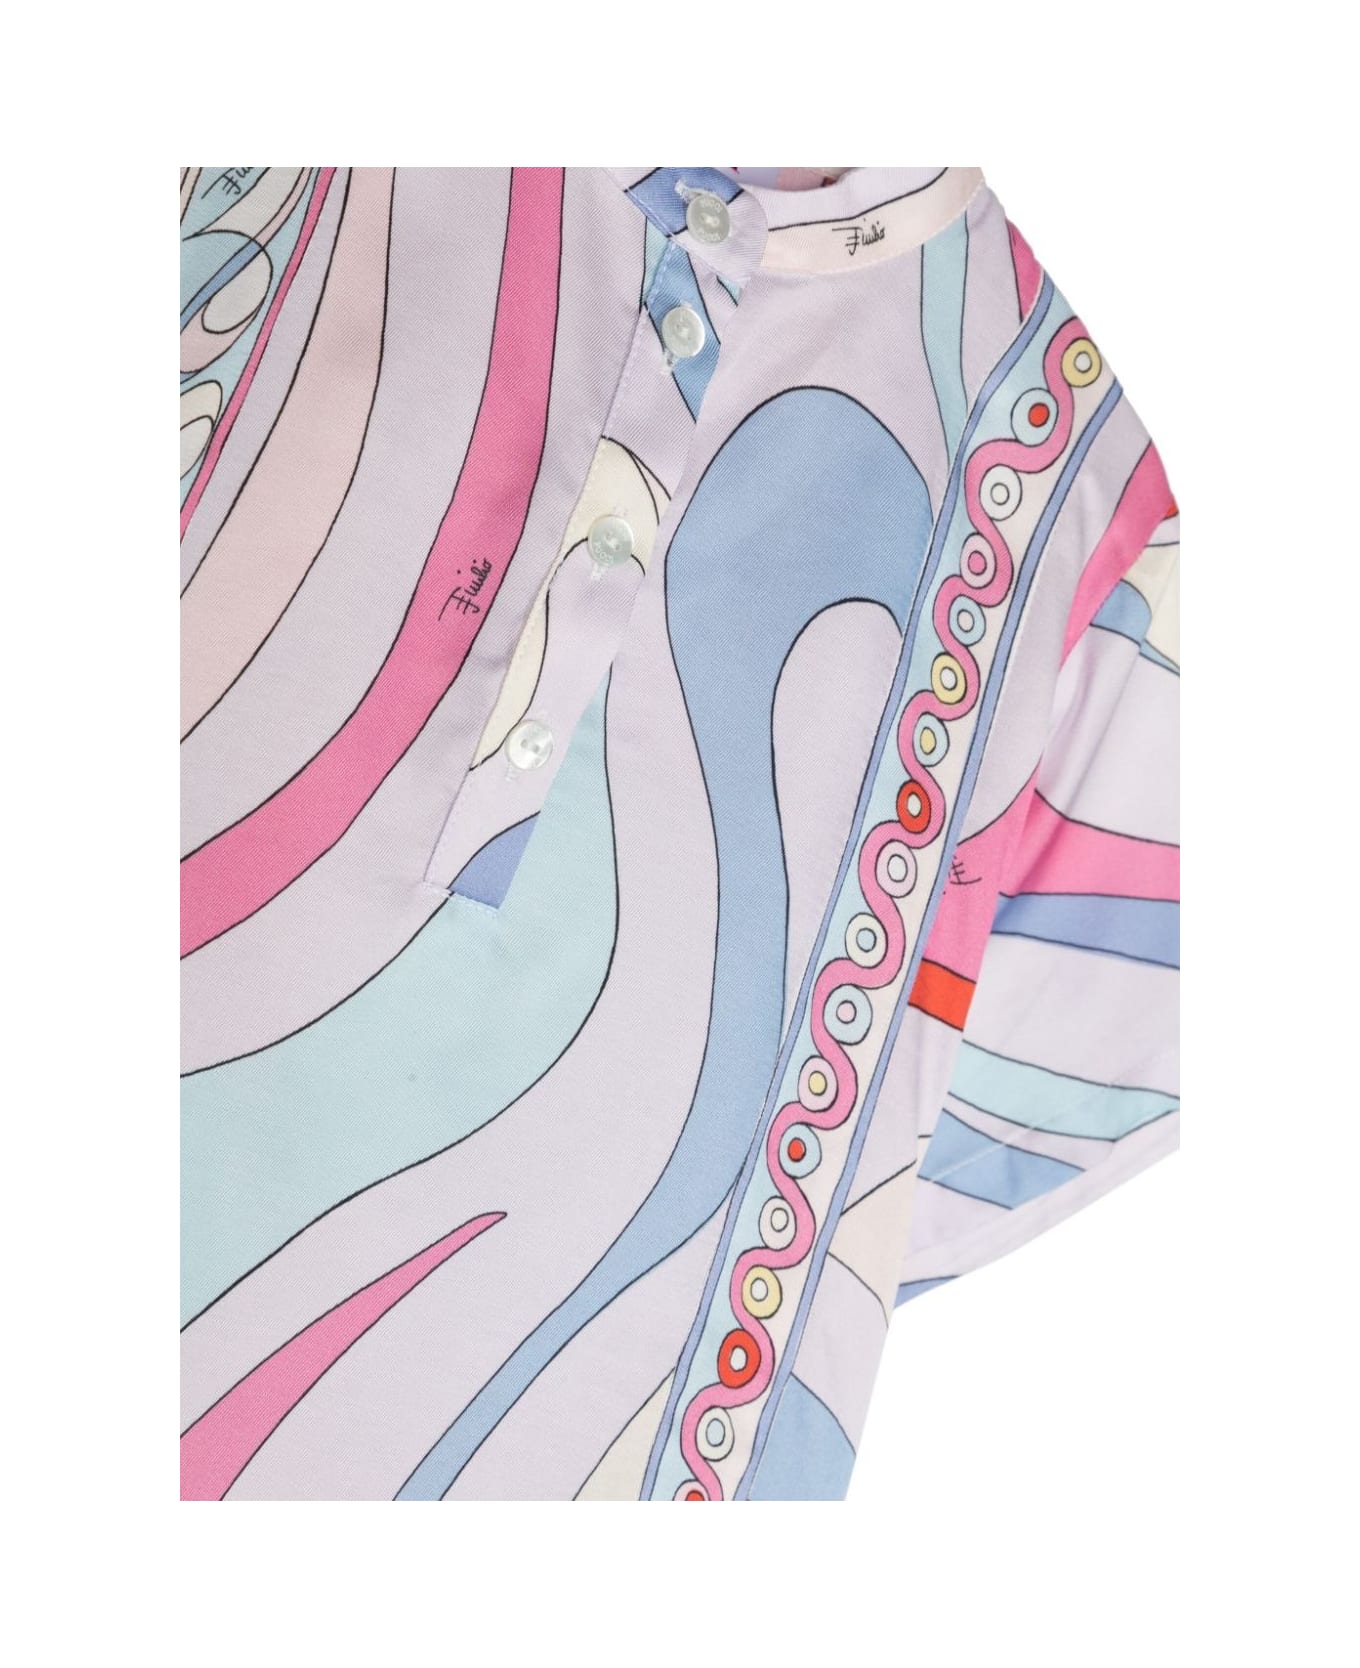 Pucci Short-sleeved Shirt With Light Blue/multicolour Iride Print - Blue